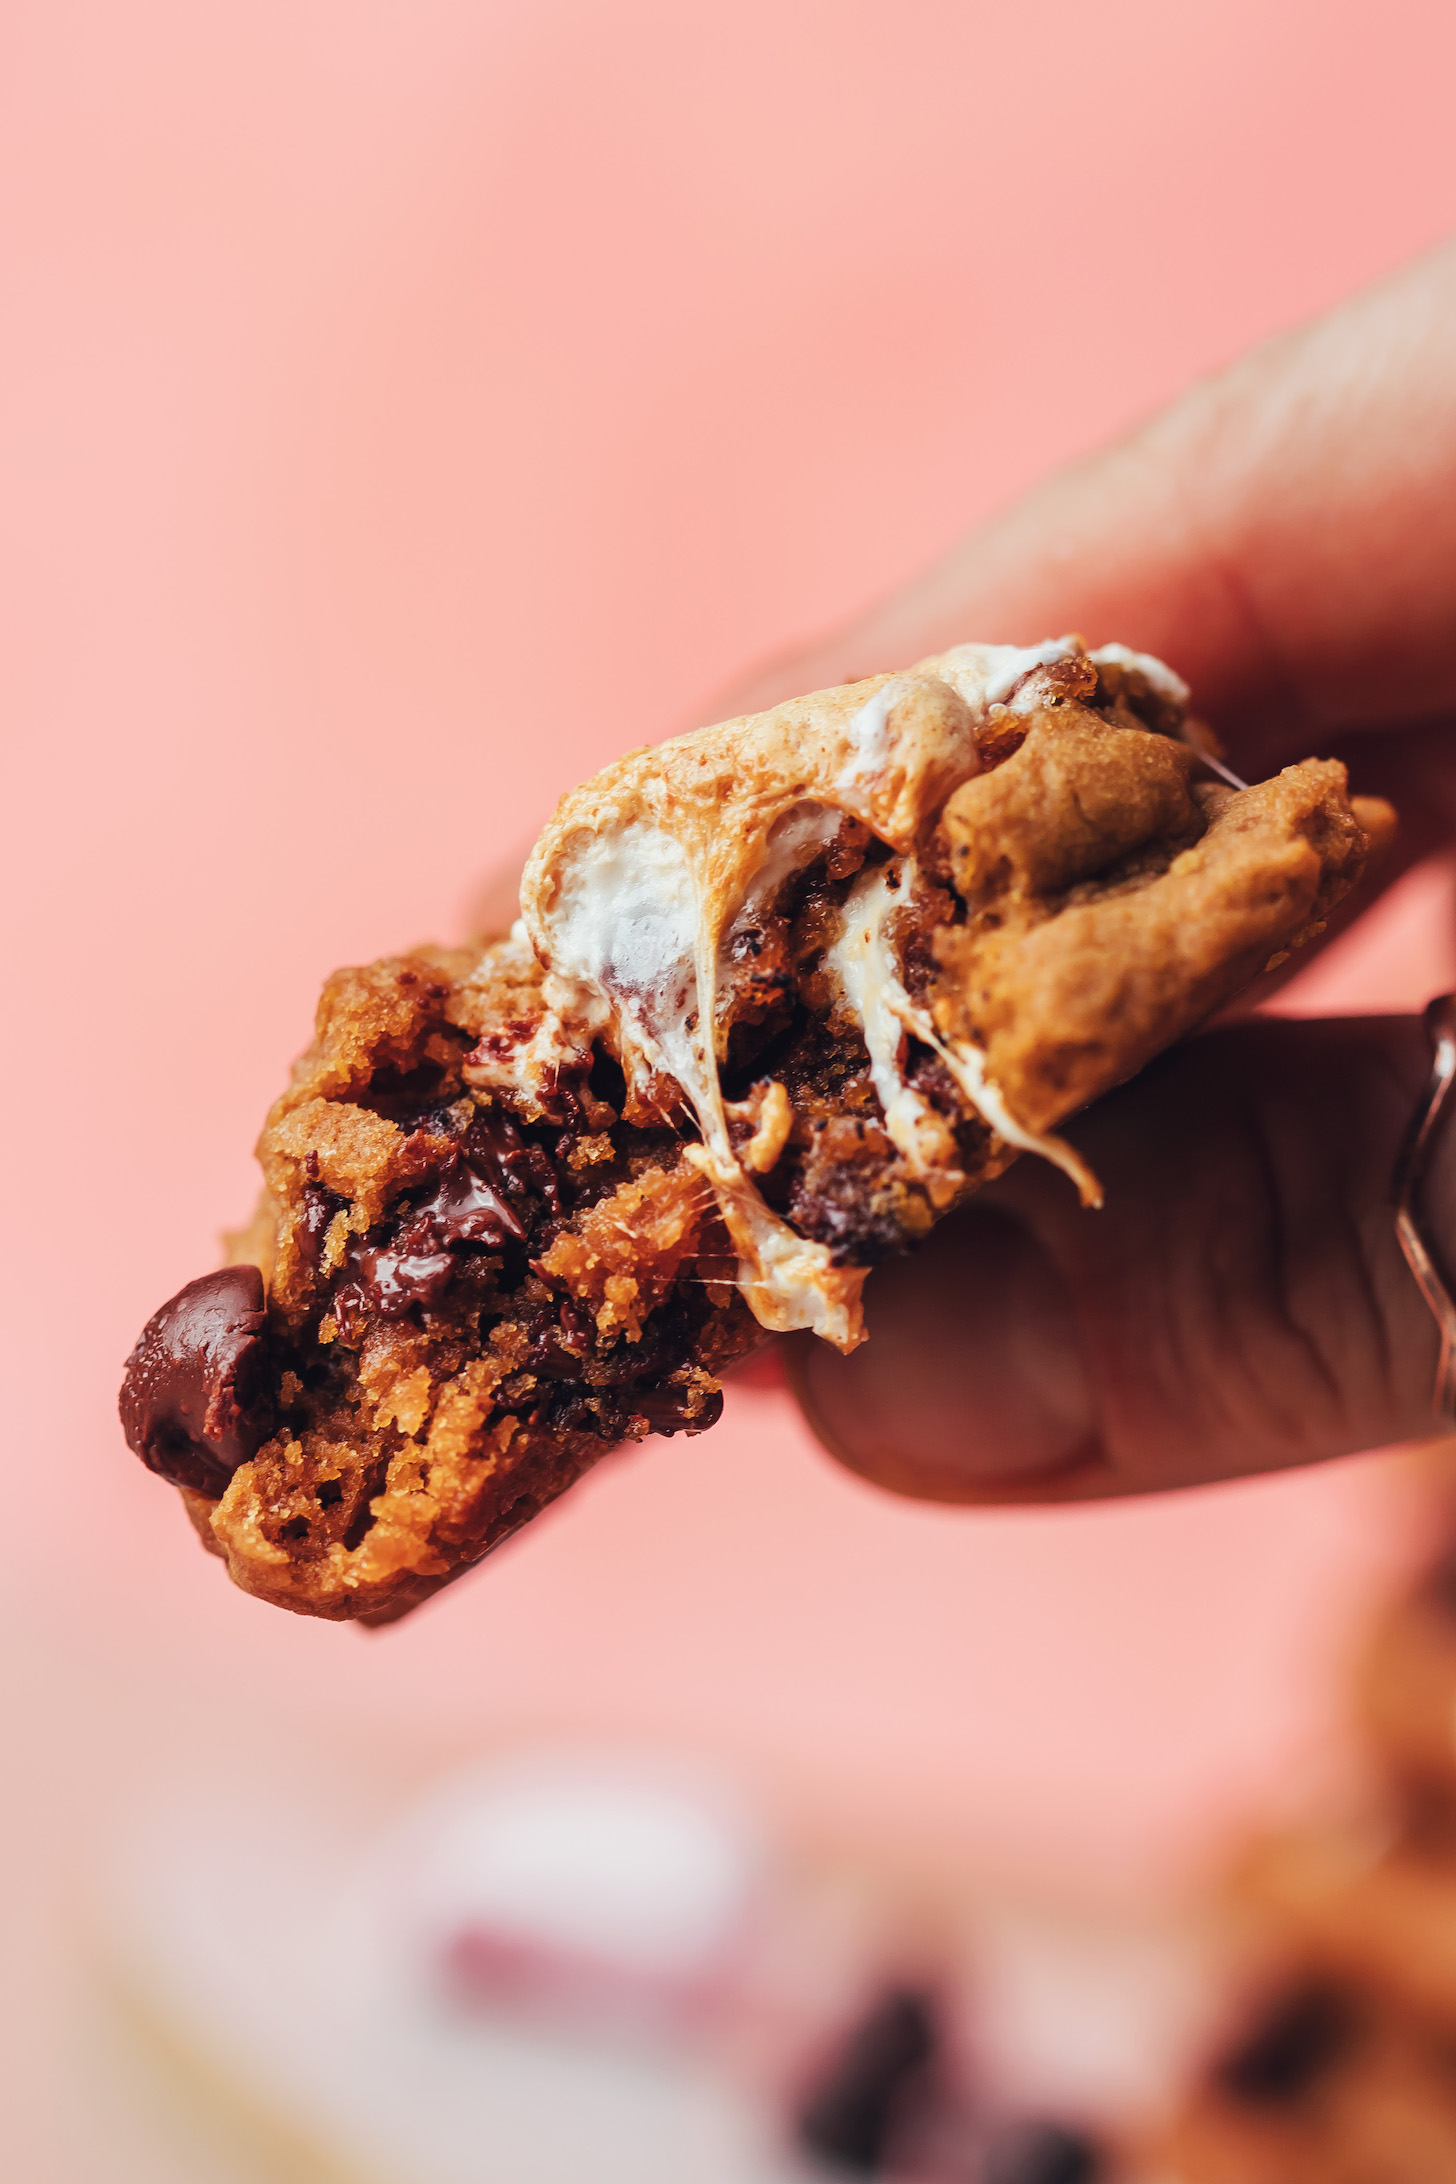 Close up show showing the inside of a vegan gluten-free s'mores cookie